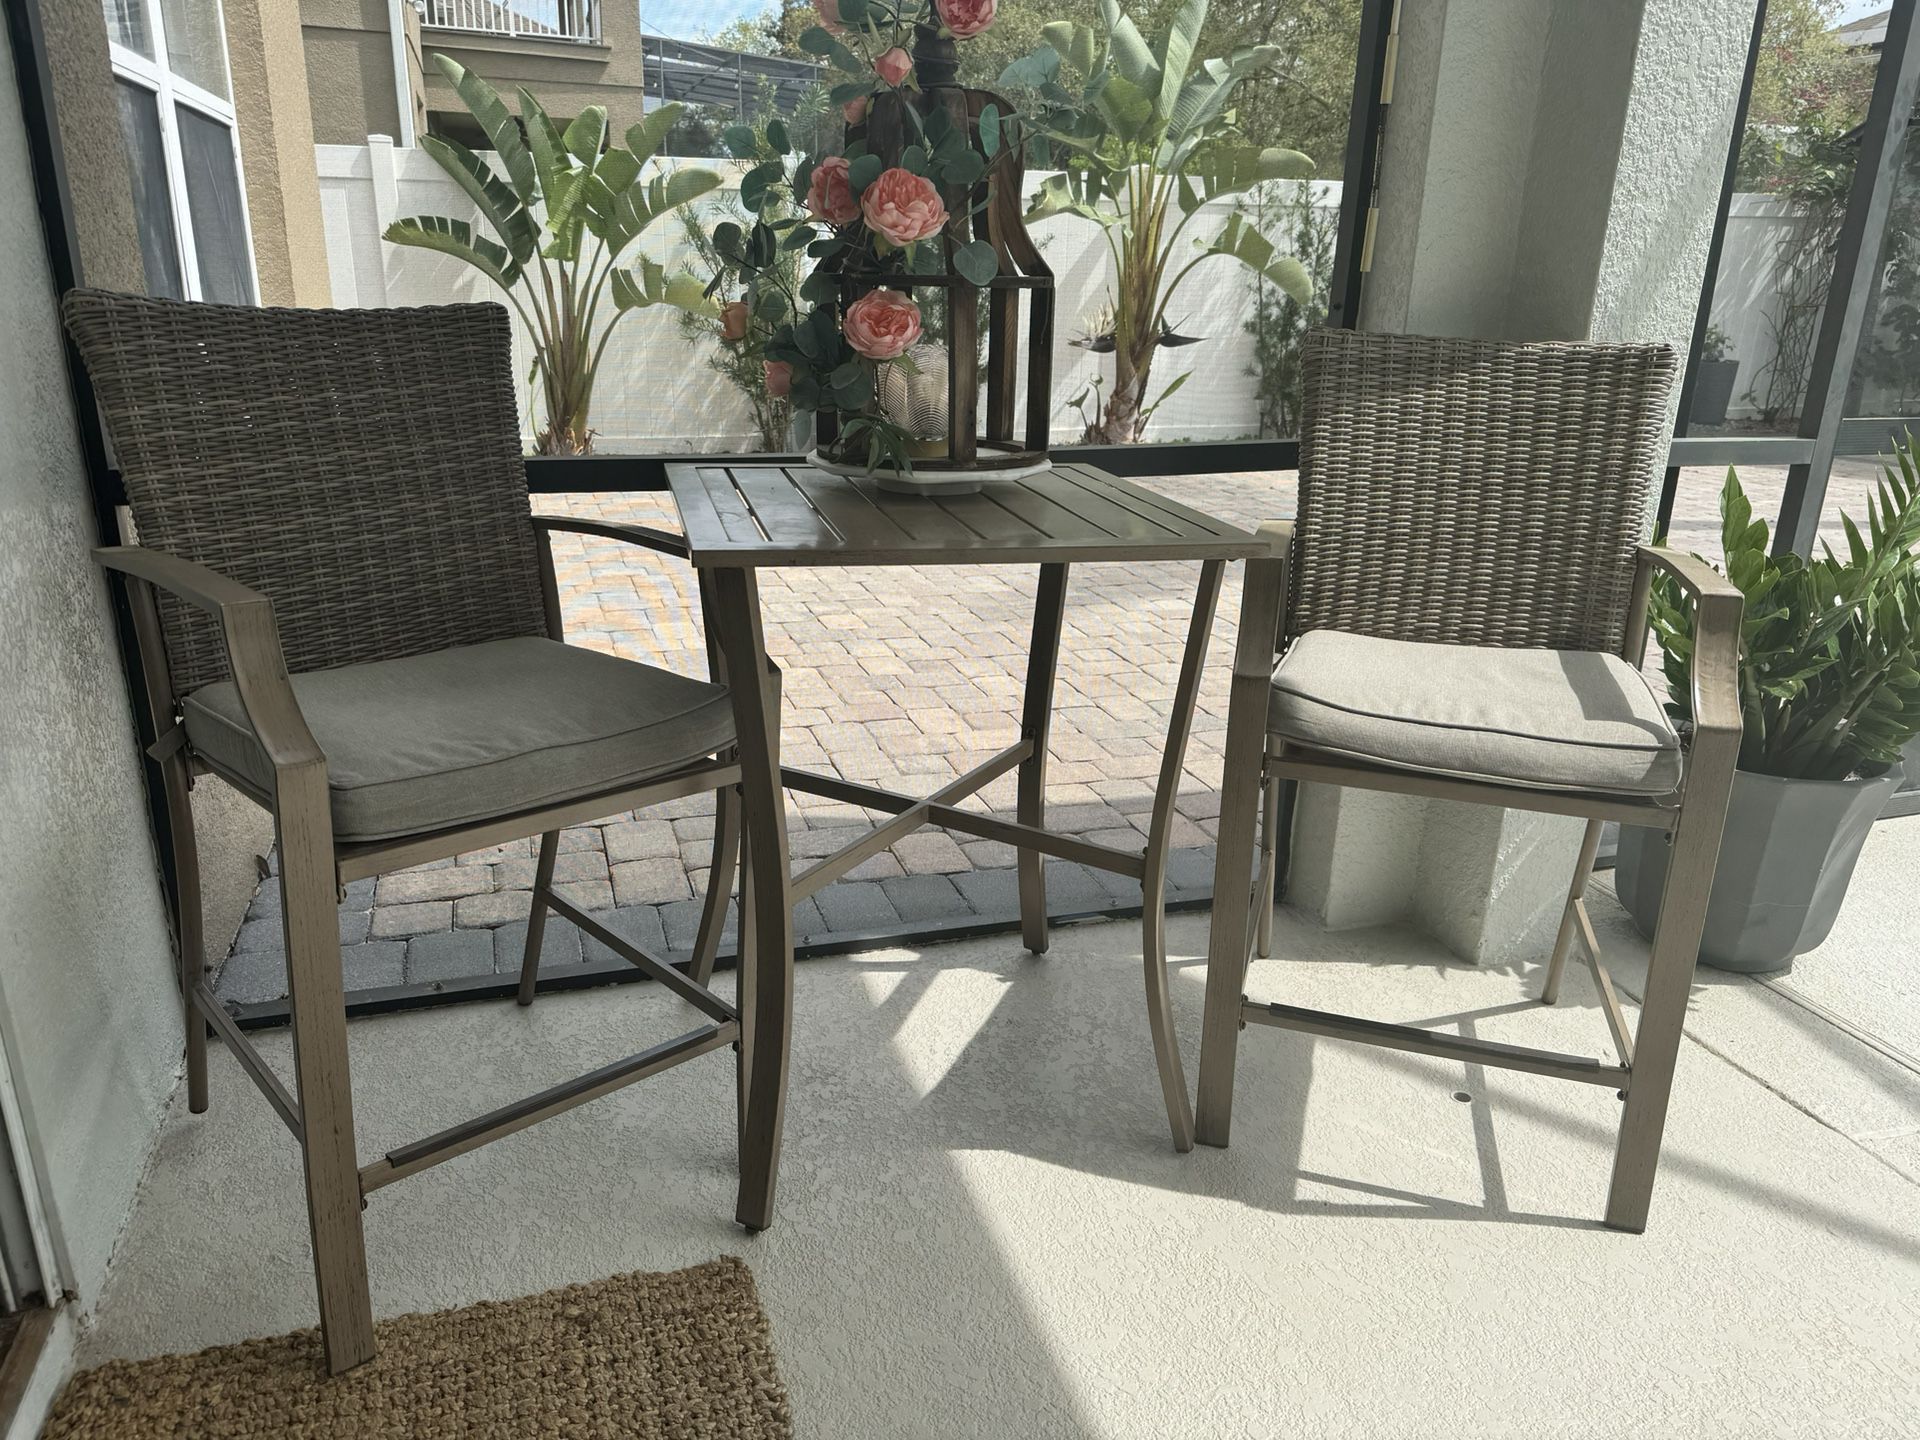 Outsunny Porch Bistro Furniture, Set of 2 Patio Chairs.